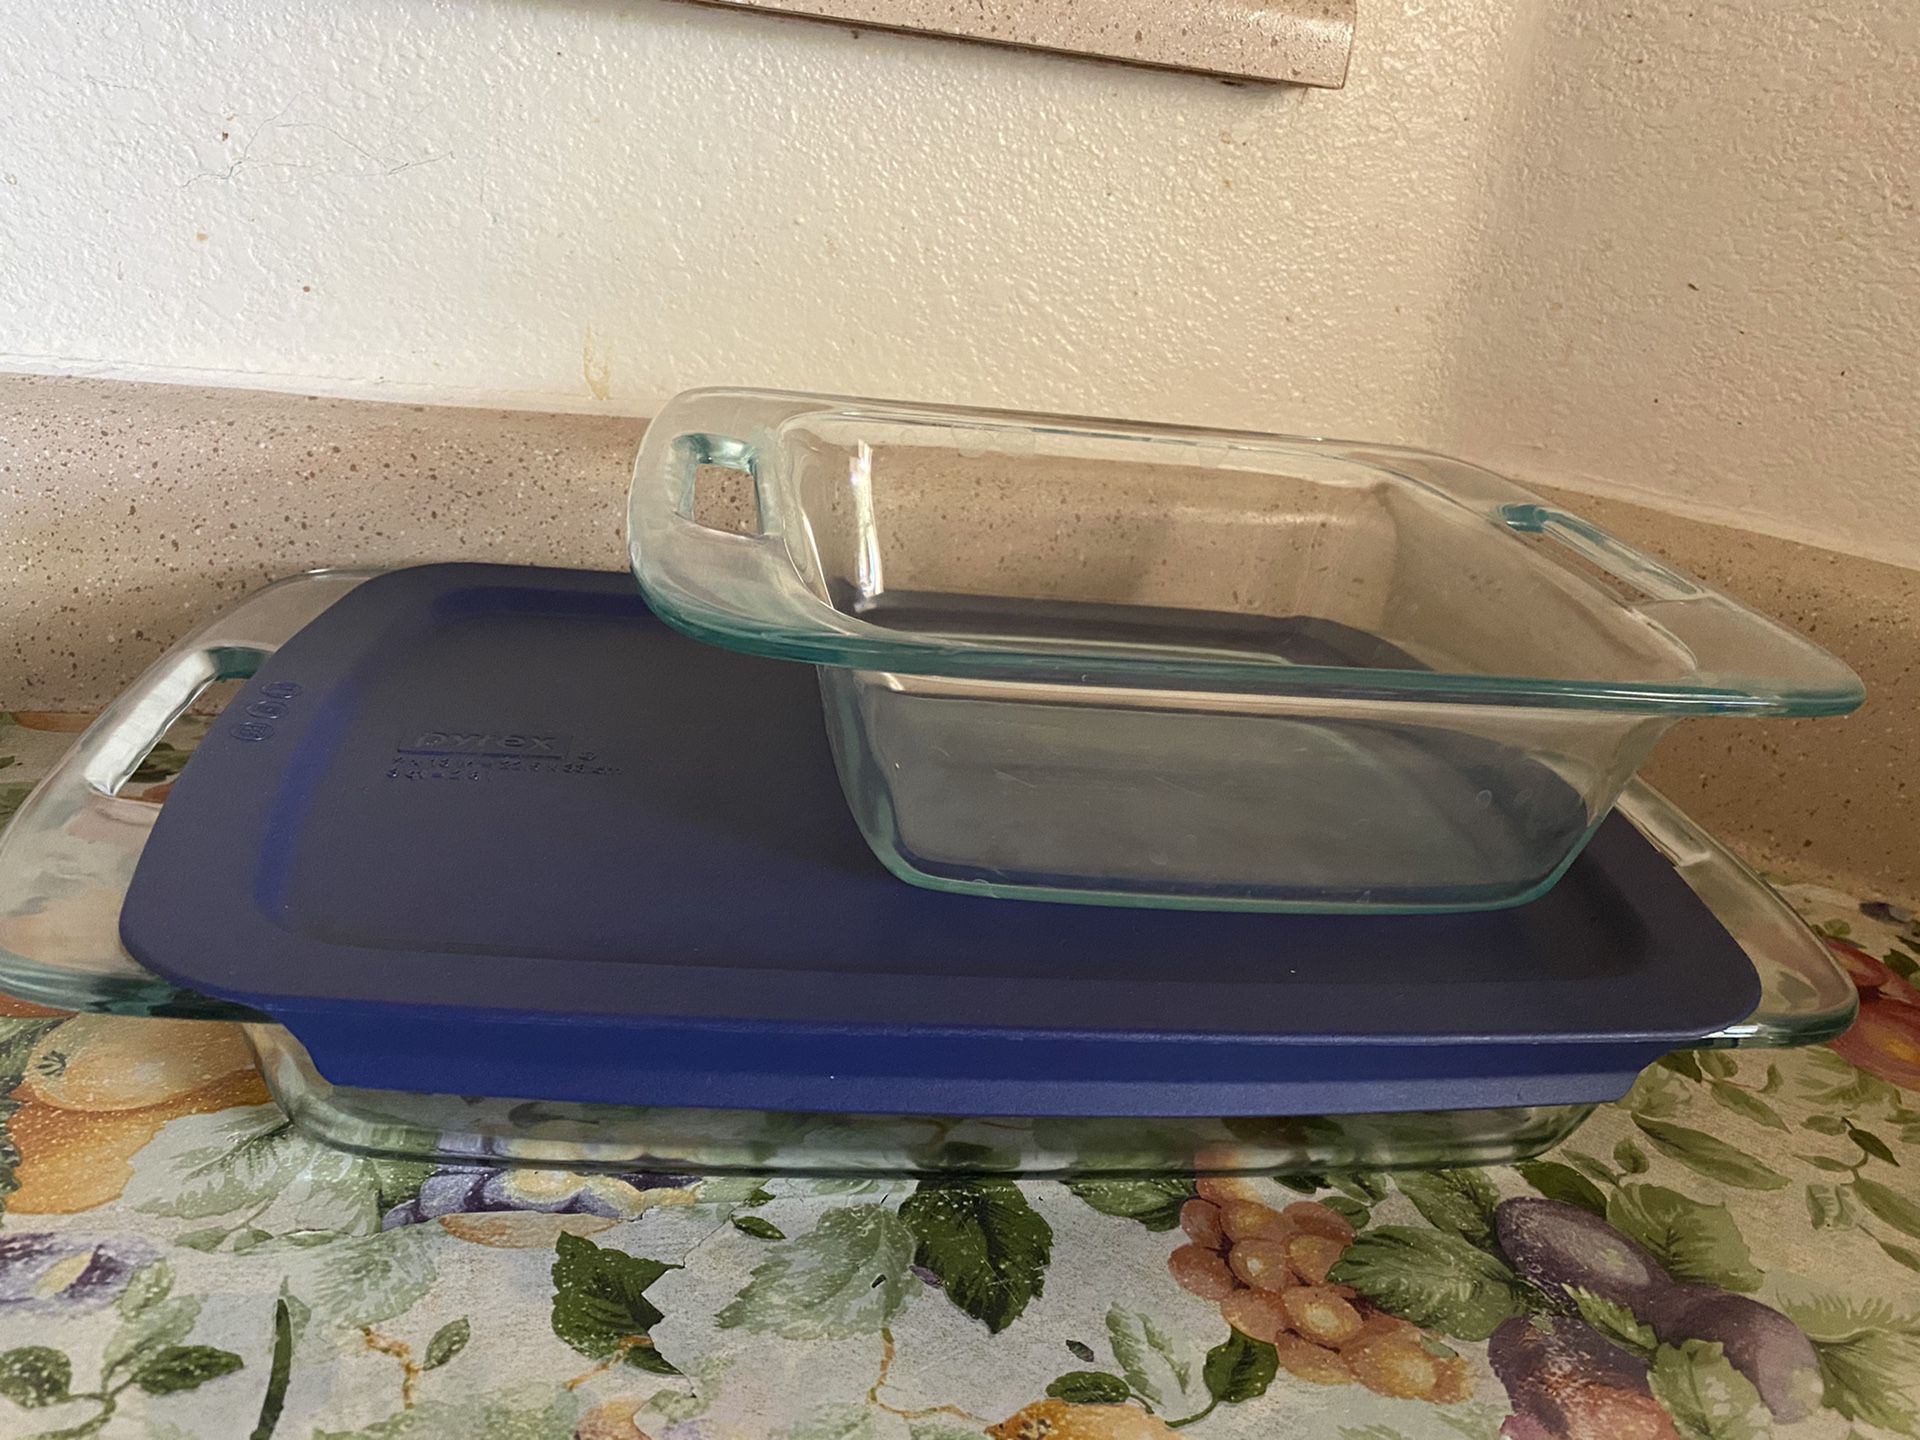 Pyrex 3qt tray with lid and 2qt open tray - $5 for both